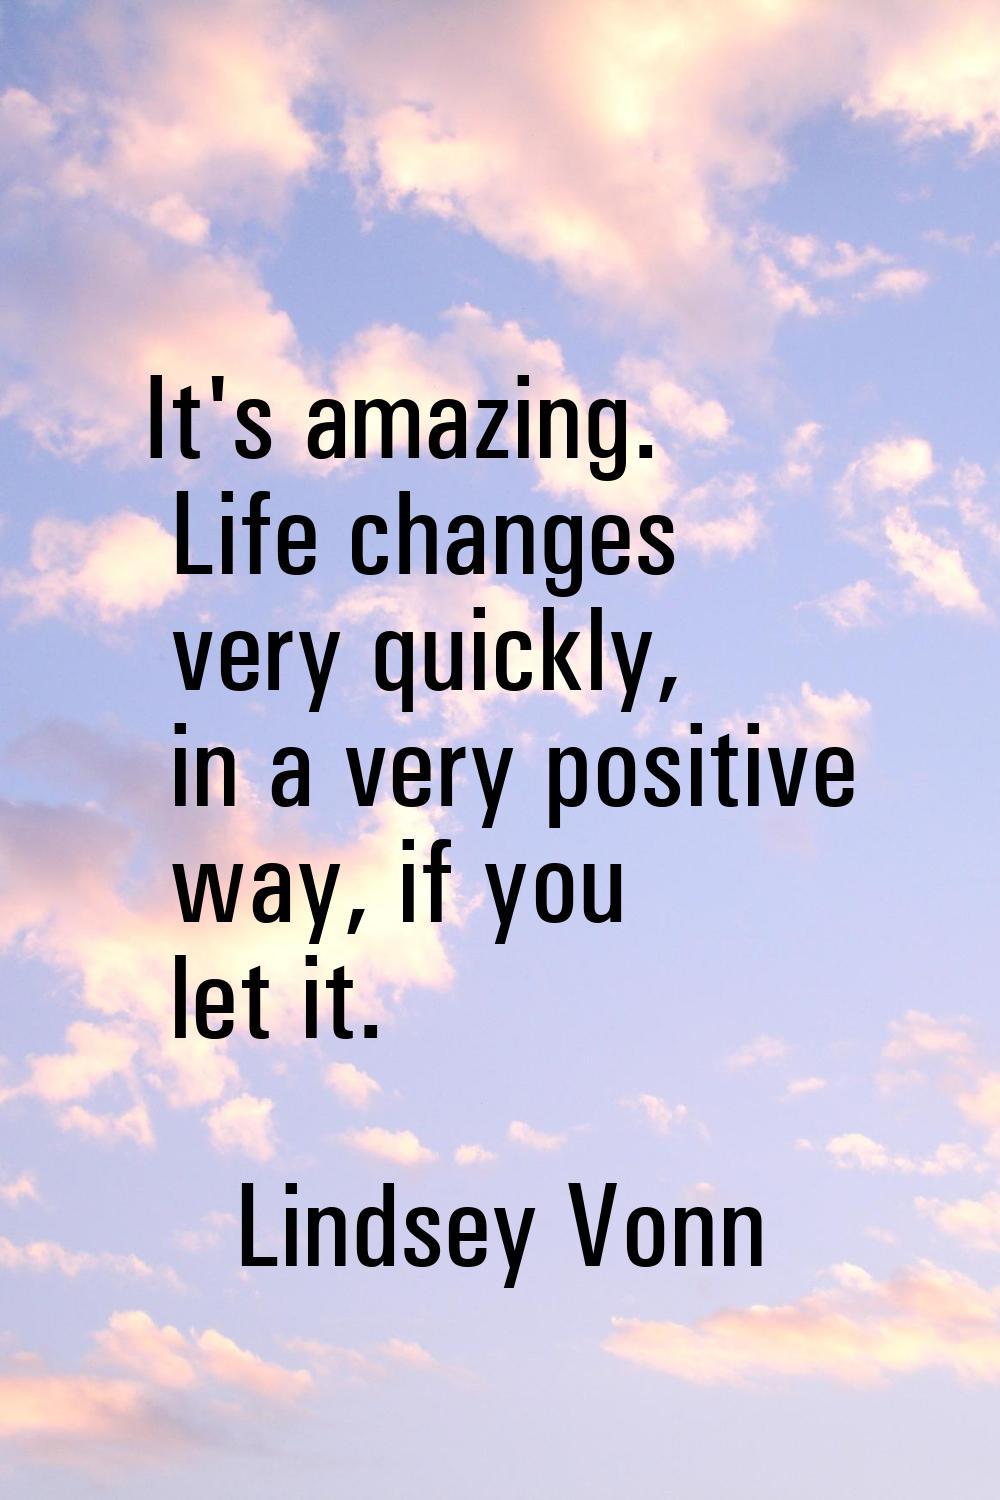 It's amazing. Life changes very quickly, in a very positive way, if you let it.